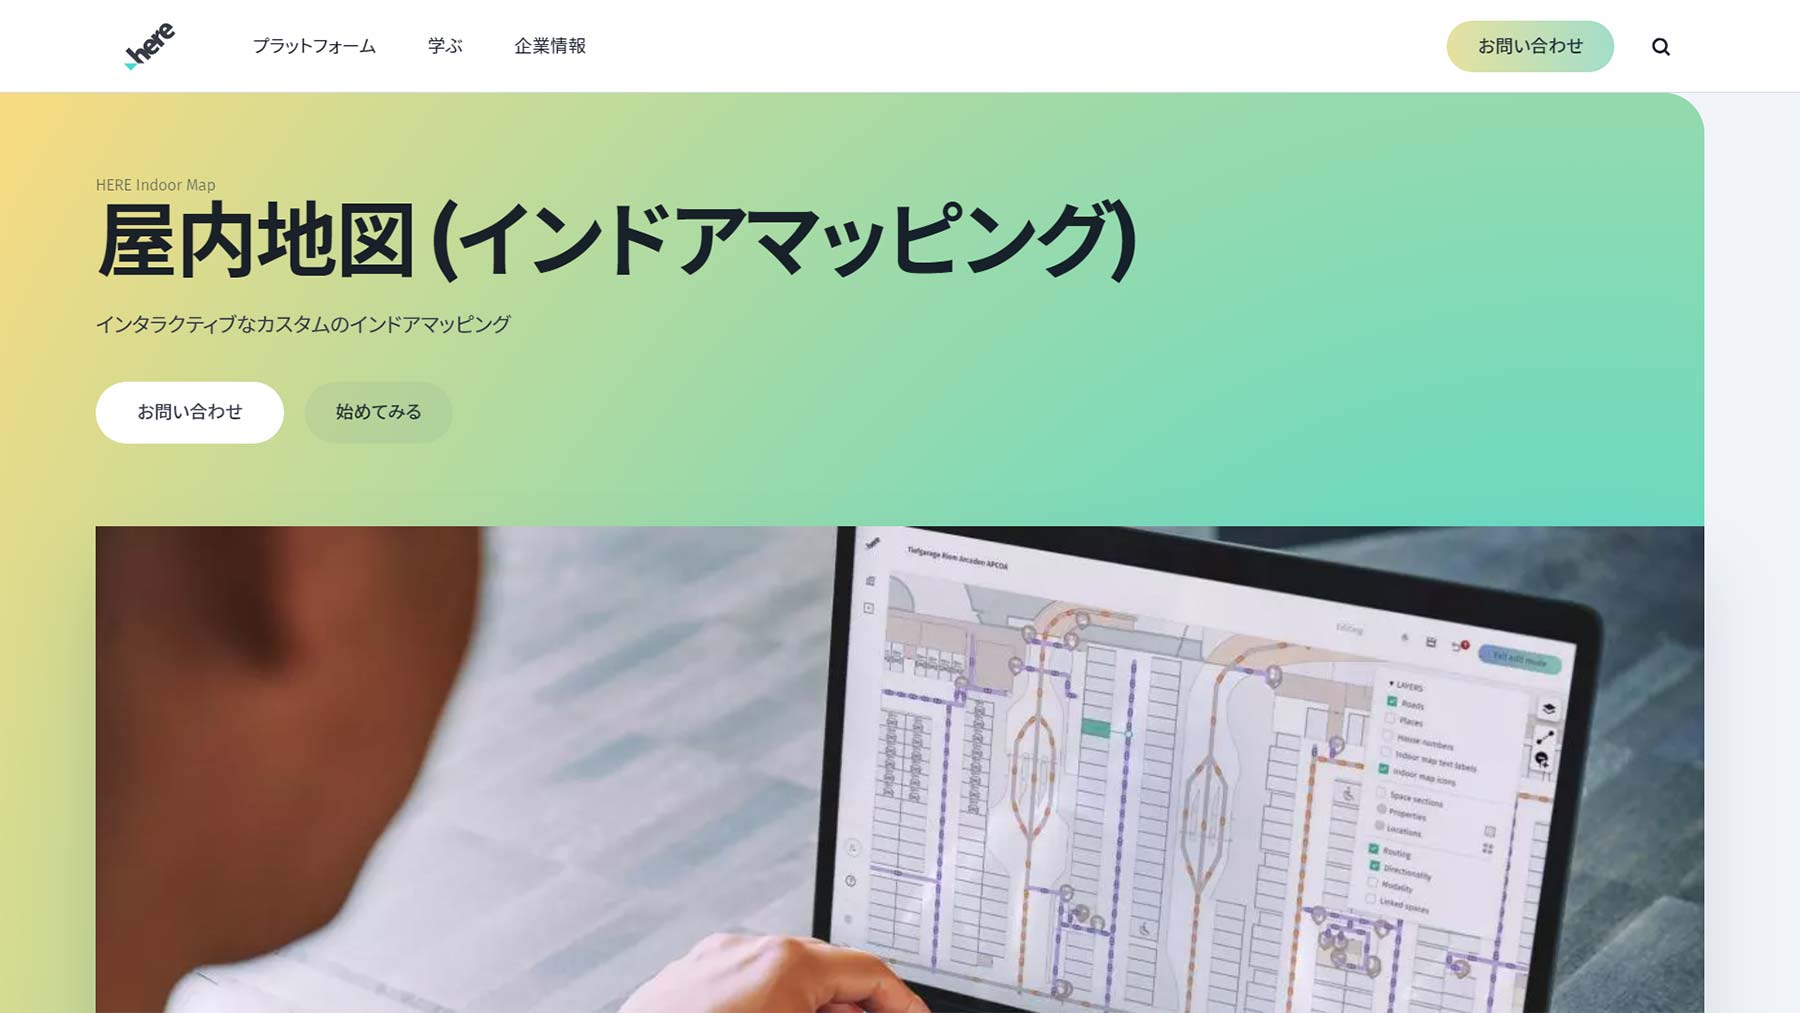 HERE Indoor Map公式Webサイト